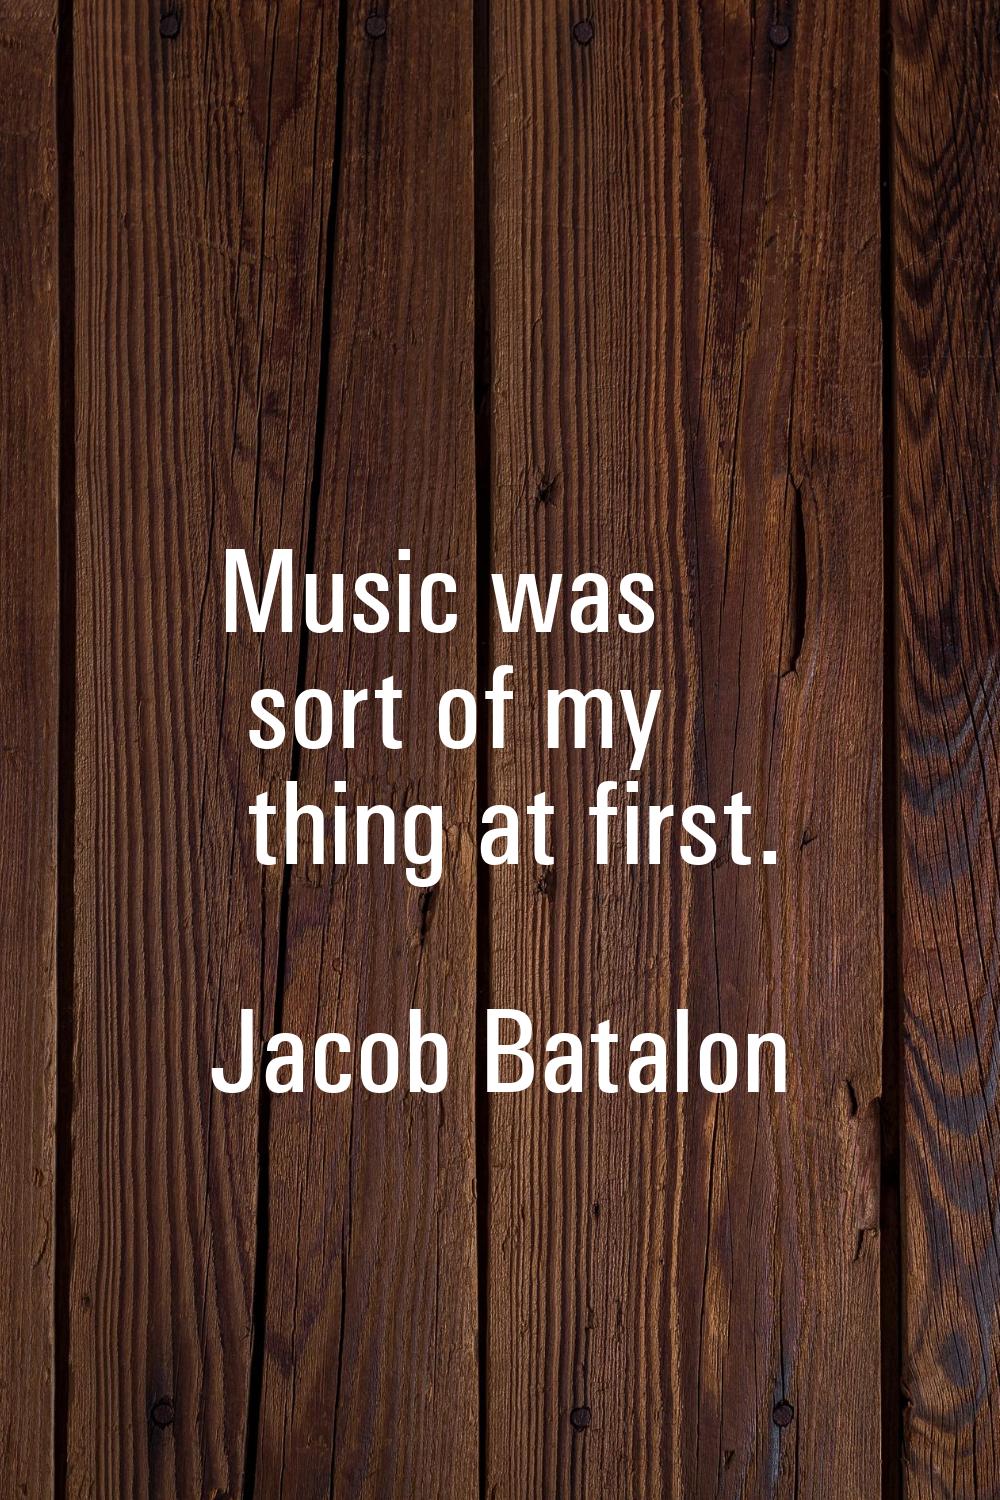 Music was sort of my thing at first.